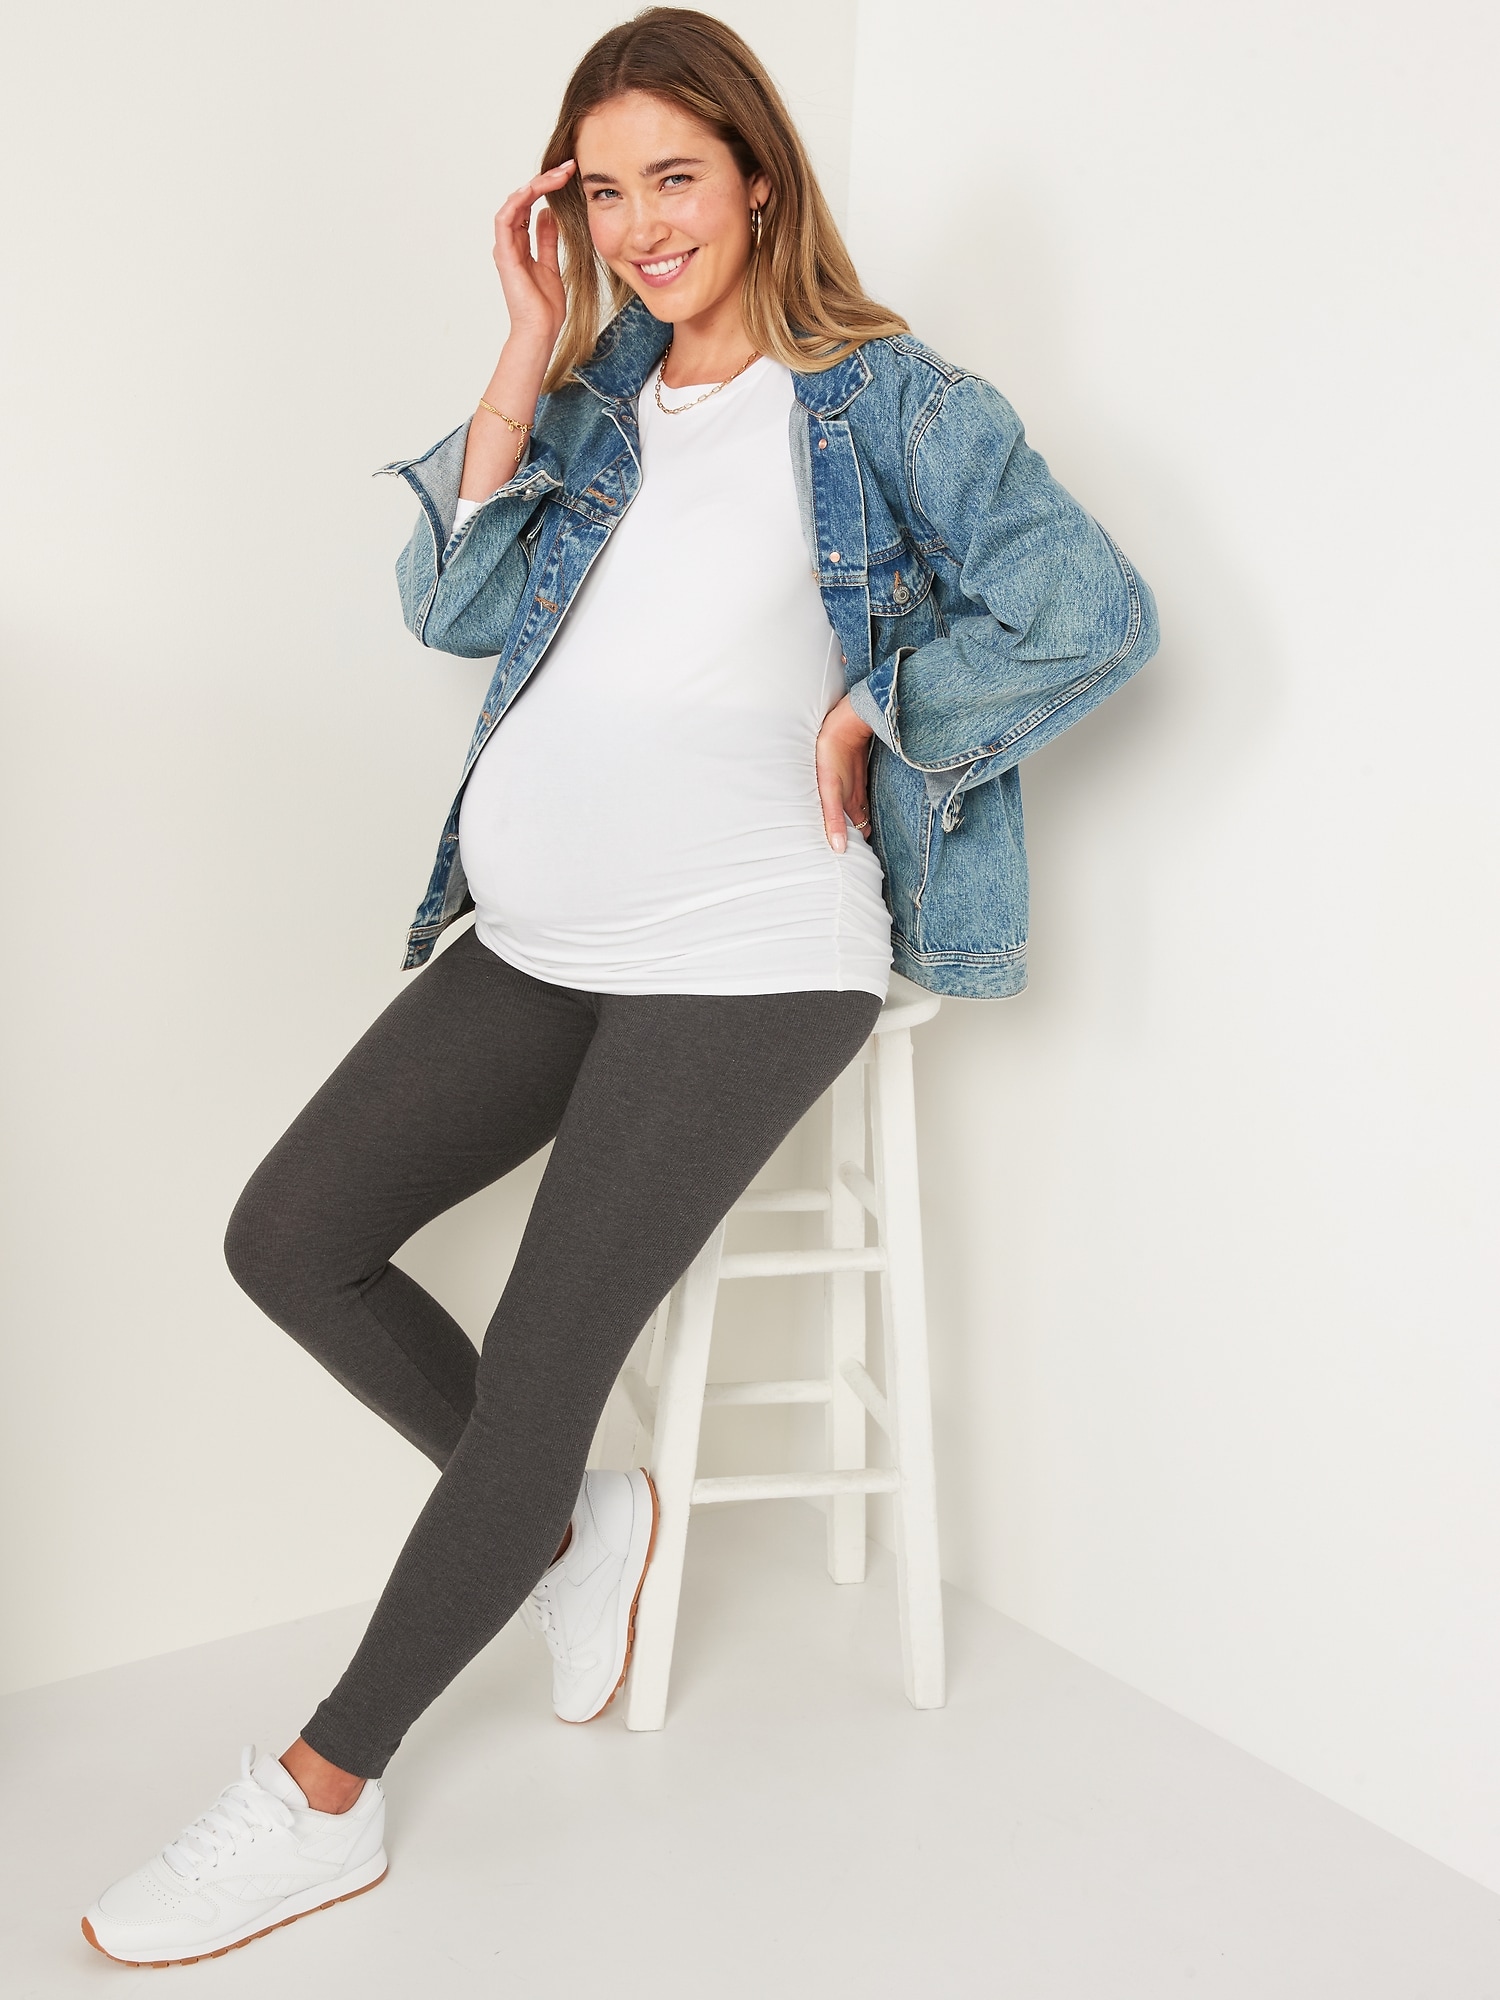 Buy Maternity Jeans Archives - Mothersyard =Delivering Happiness